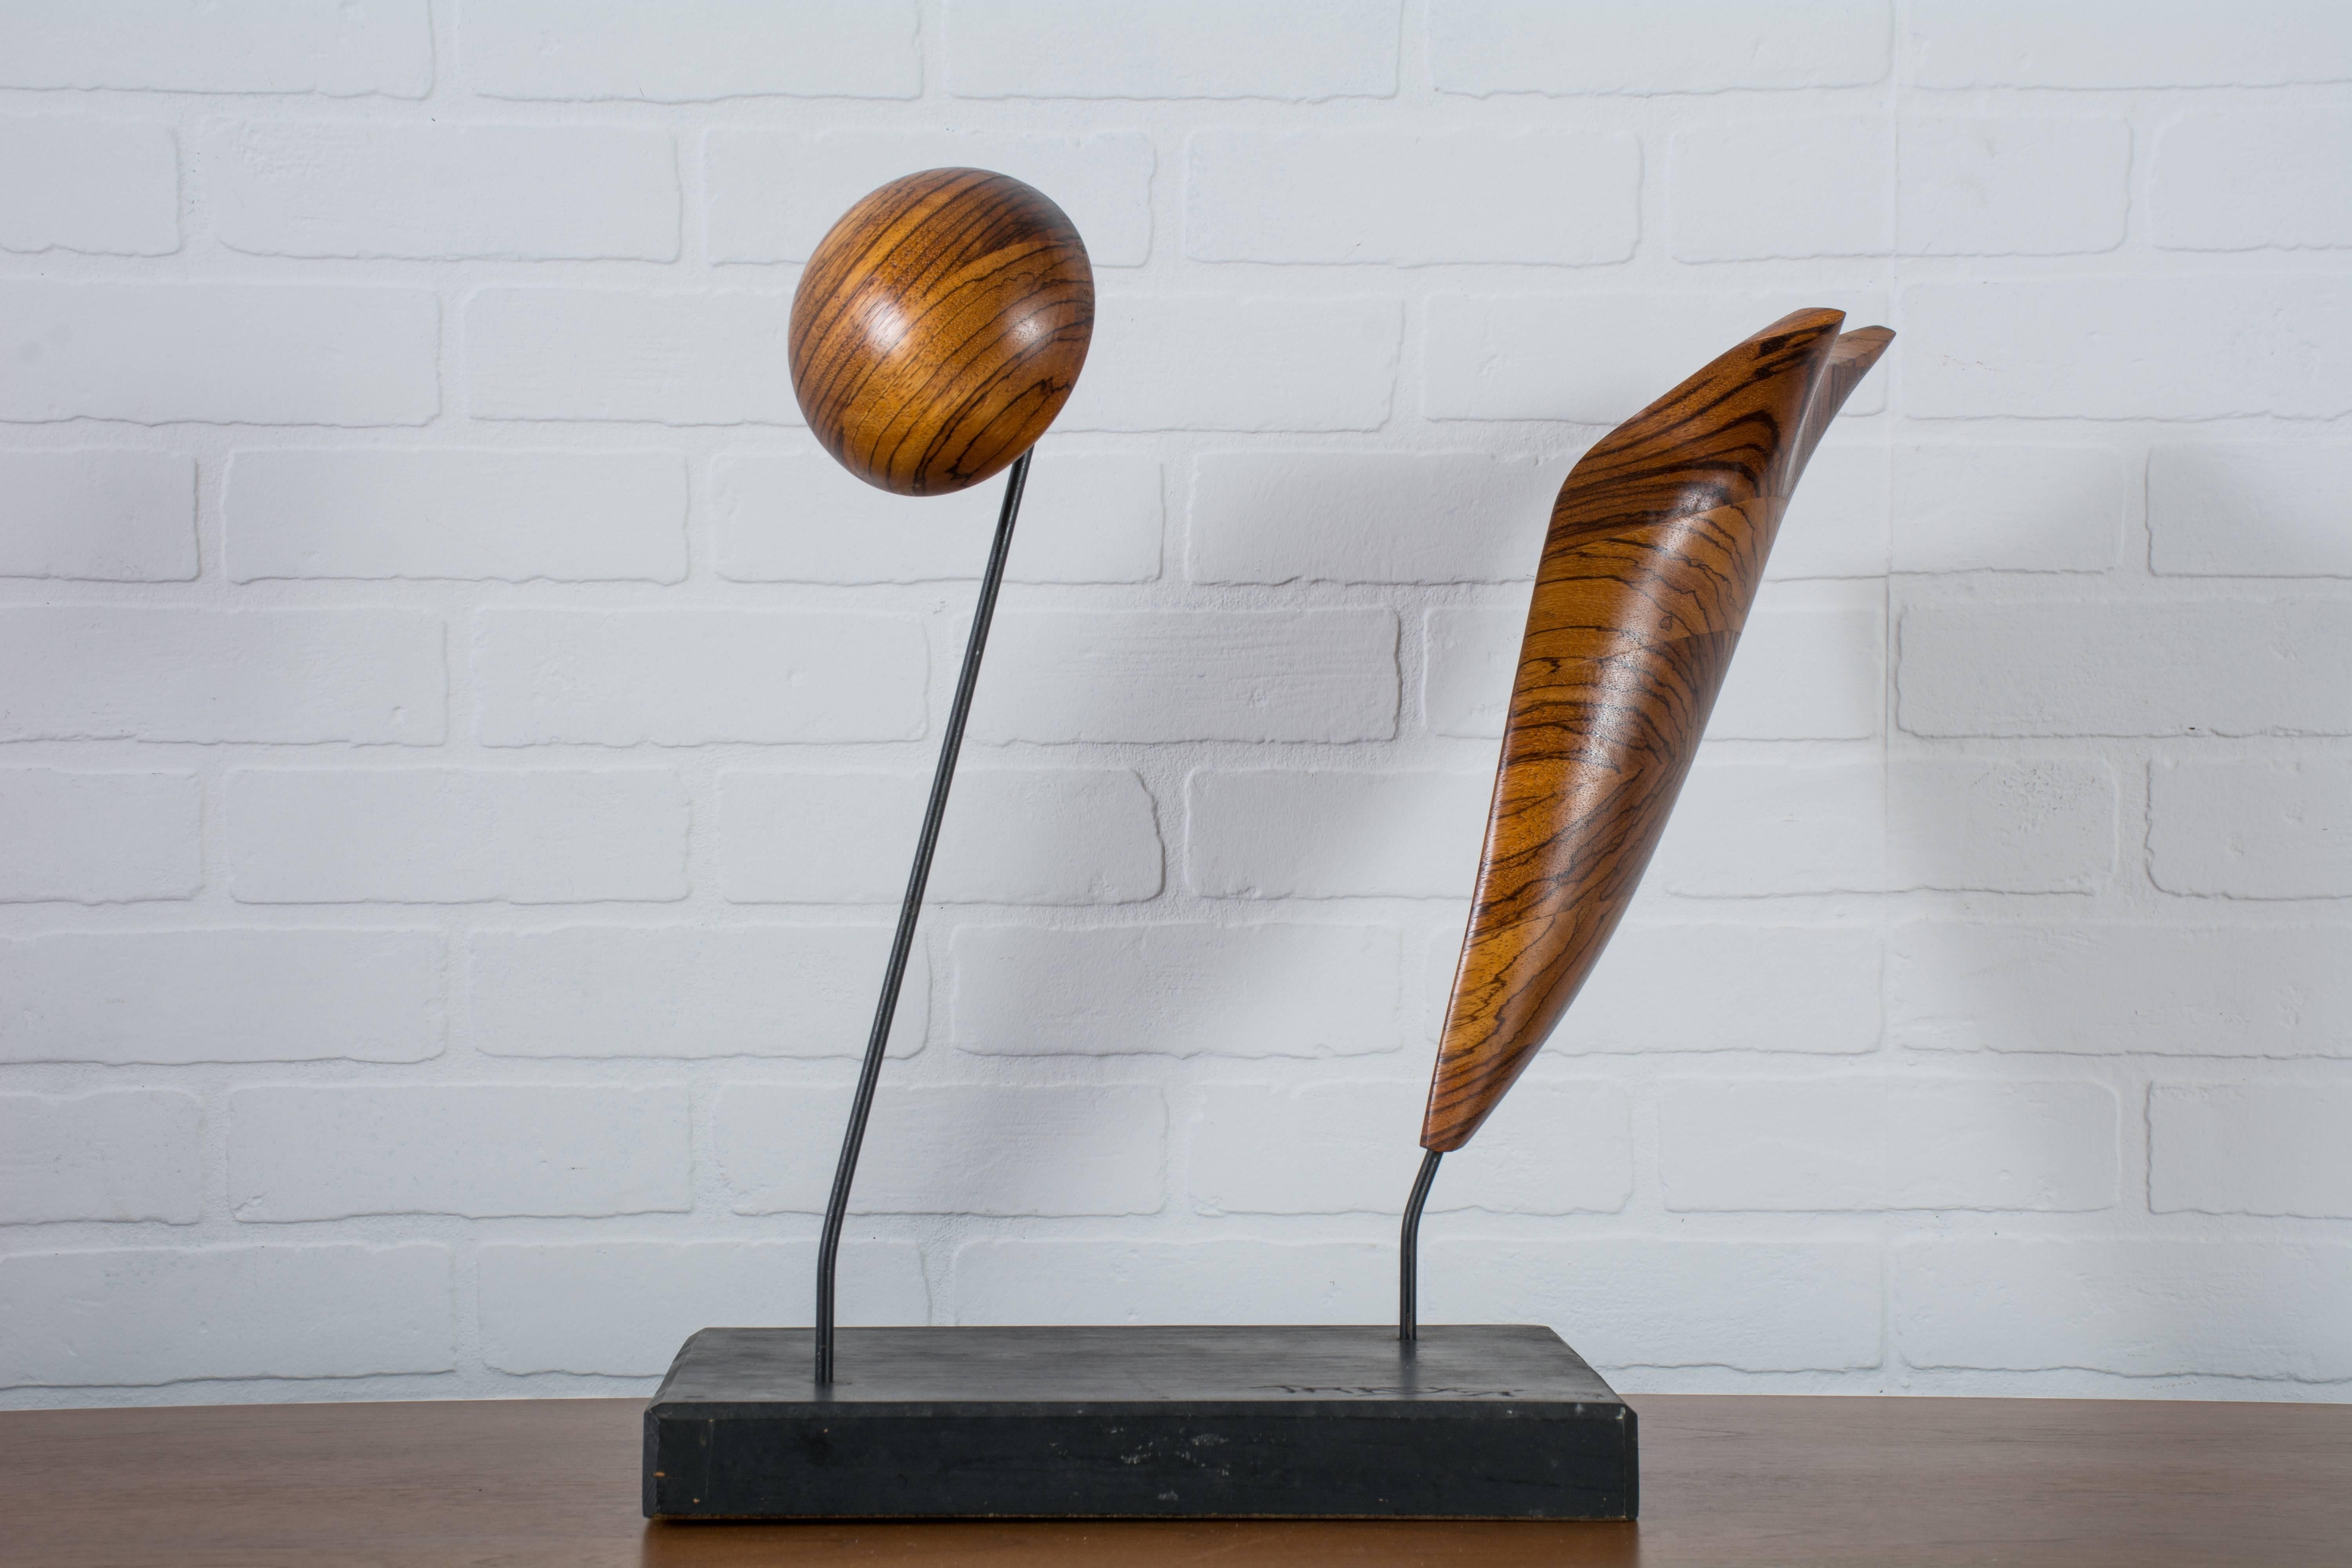 Late 20th Century Abstract Wood Sculpture Signed Tracy, 1971